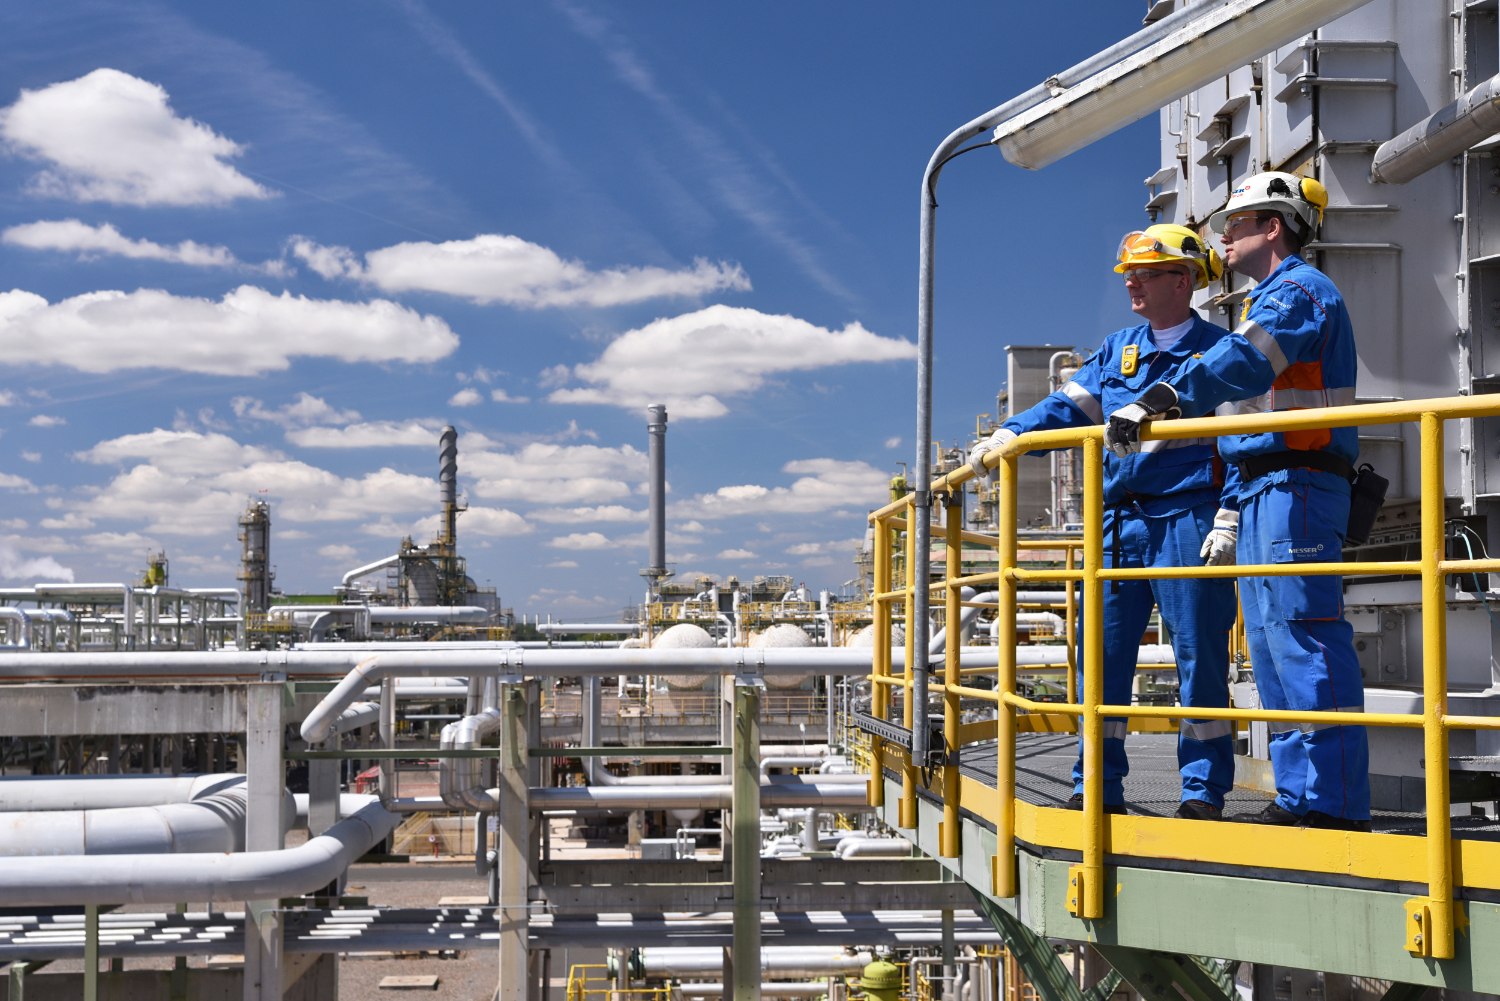 Background Image of 2 men at refinery-1